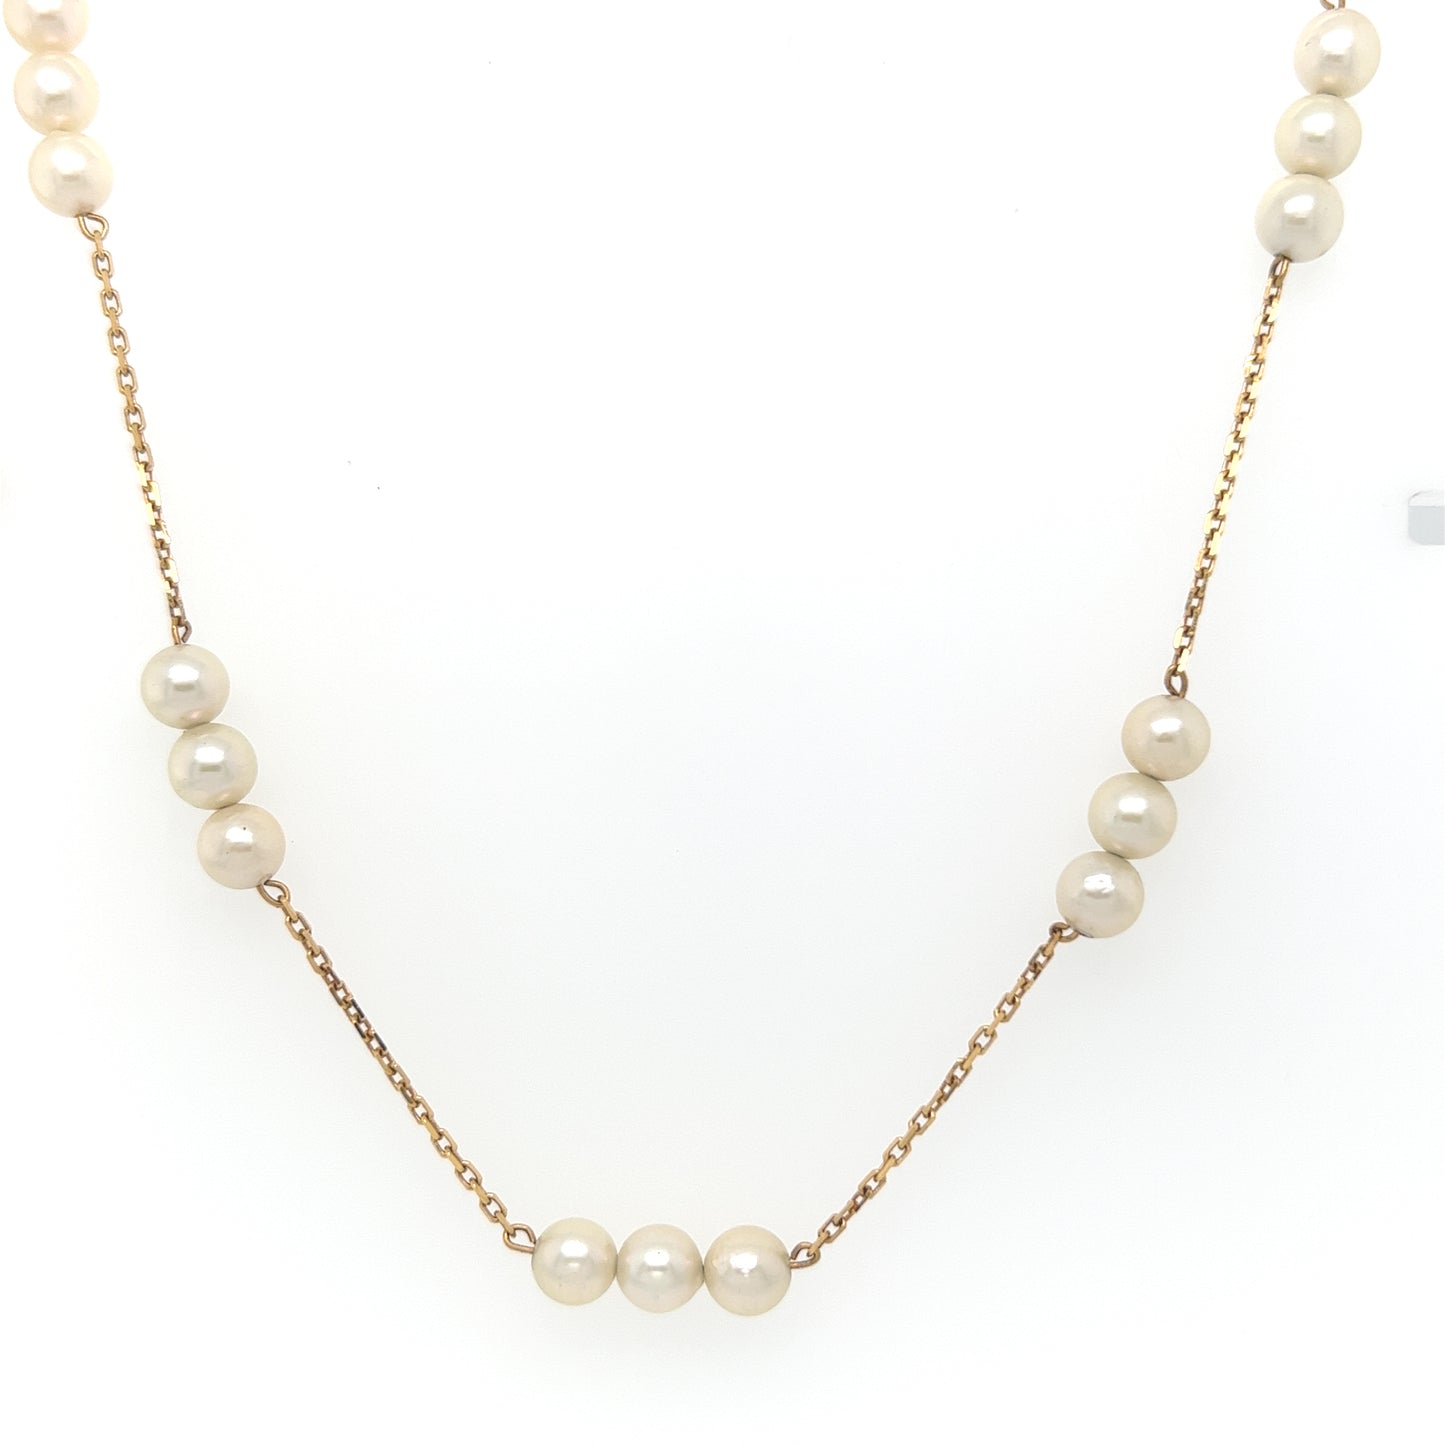 K18 Gold Threaded Pearl Necklace